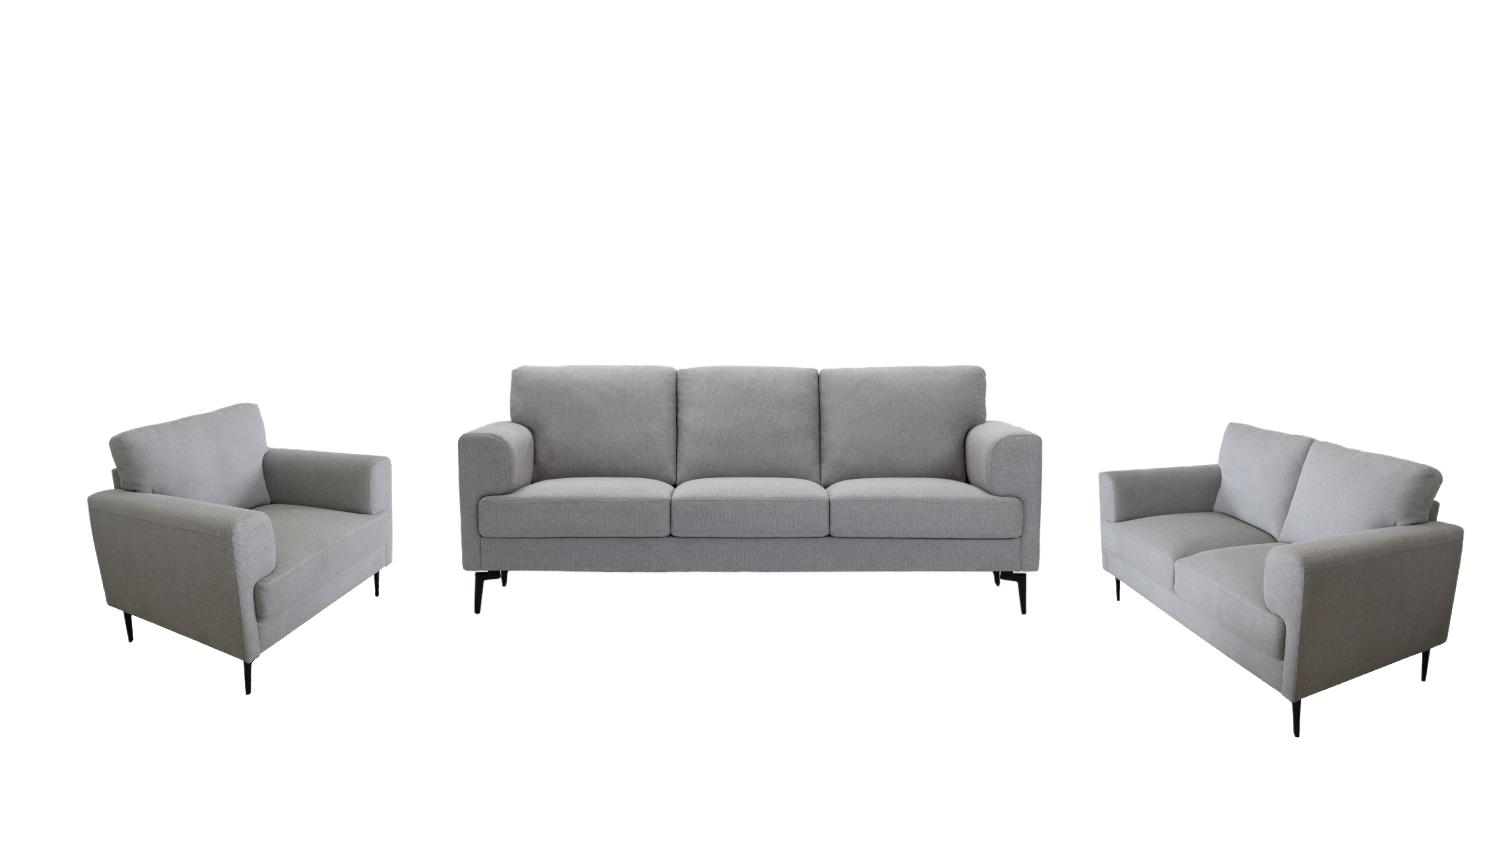 Contemporary, Classic Sofa Loveseat and Chair Set Kyrene 56925-3pcs in Light Gray Linen